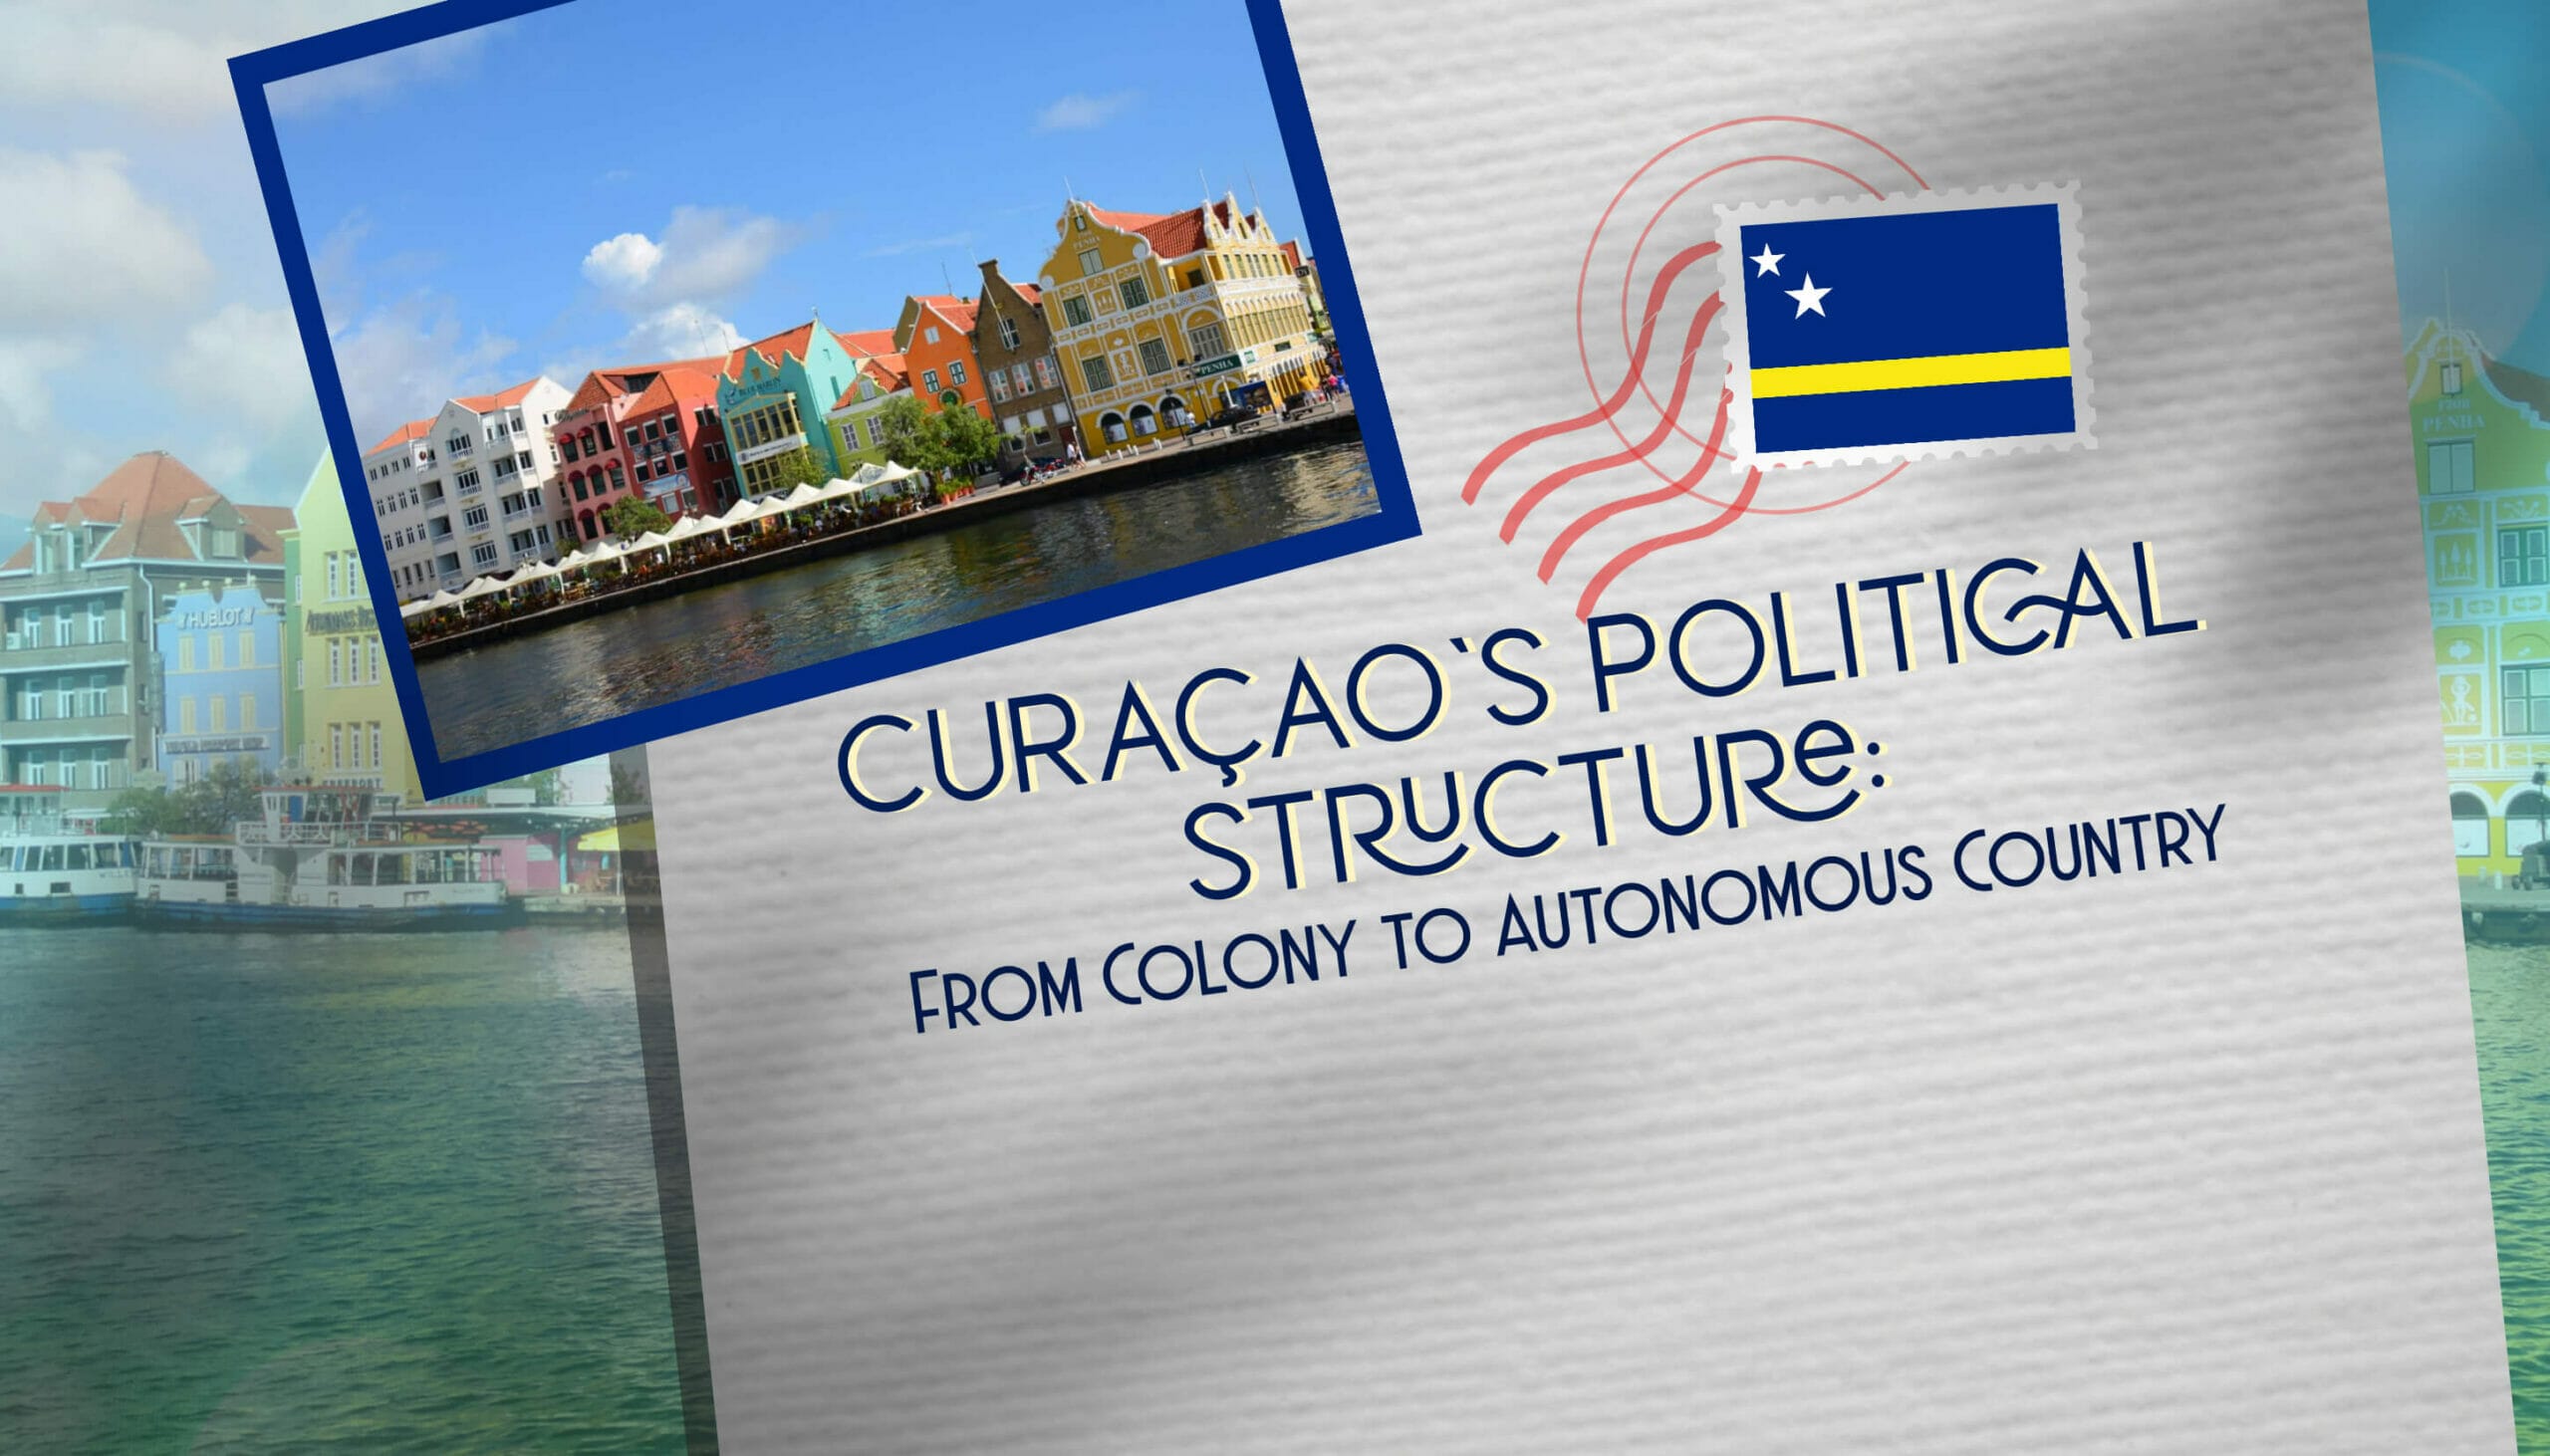 Curaçao's Political Structure: From Colony to Autonomous Country